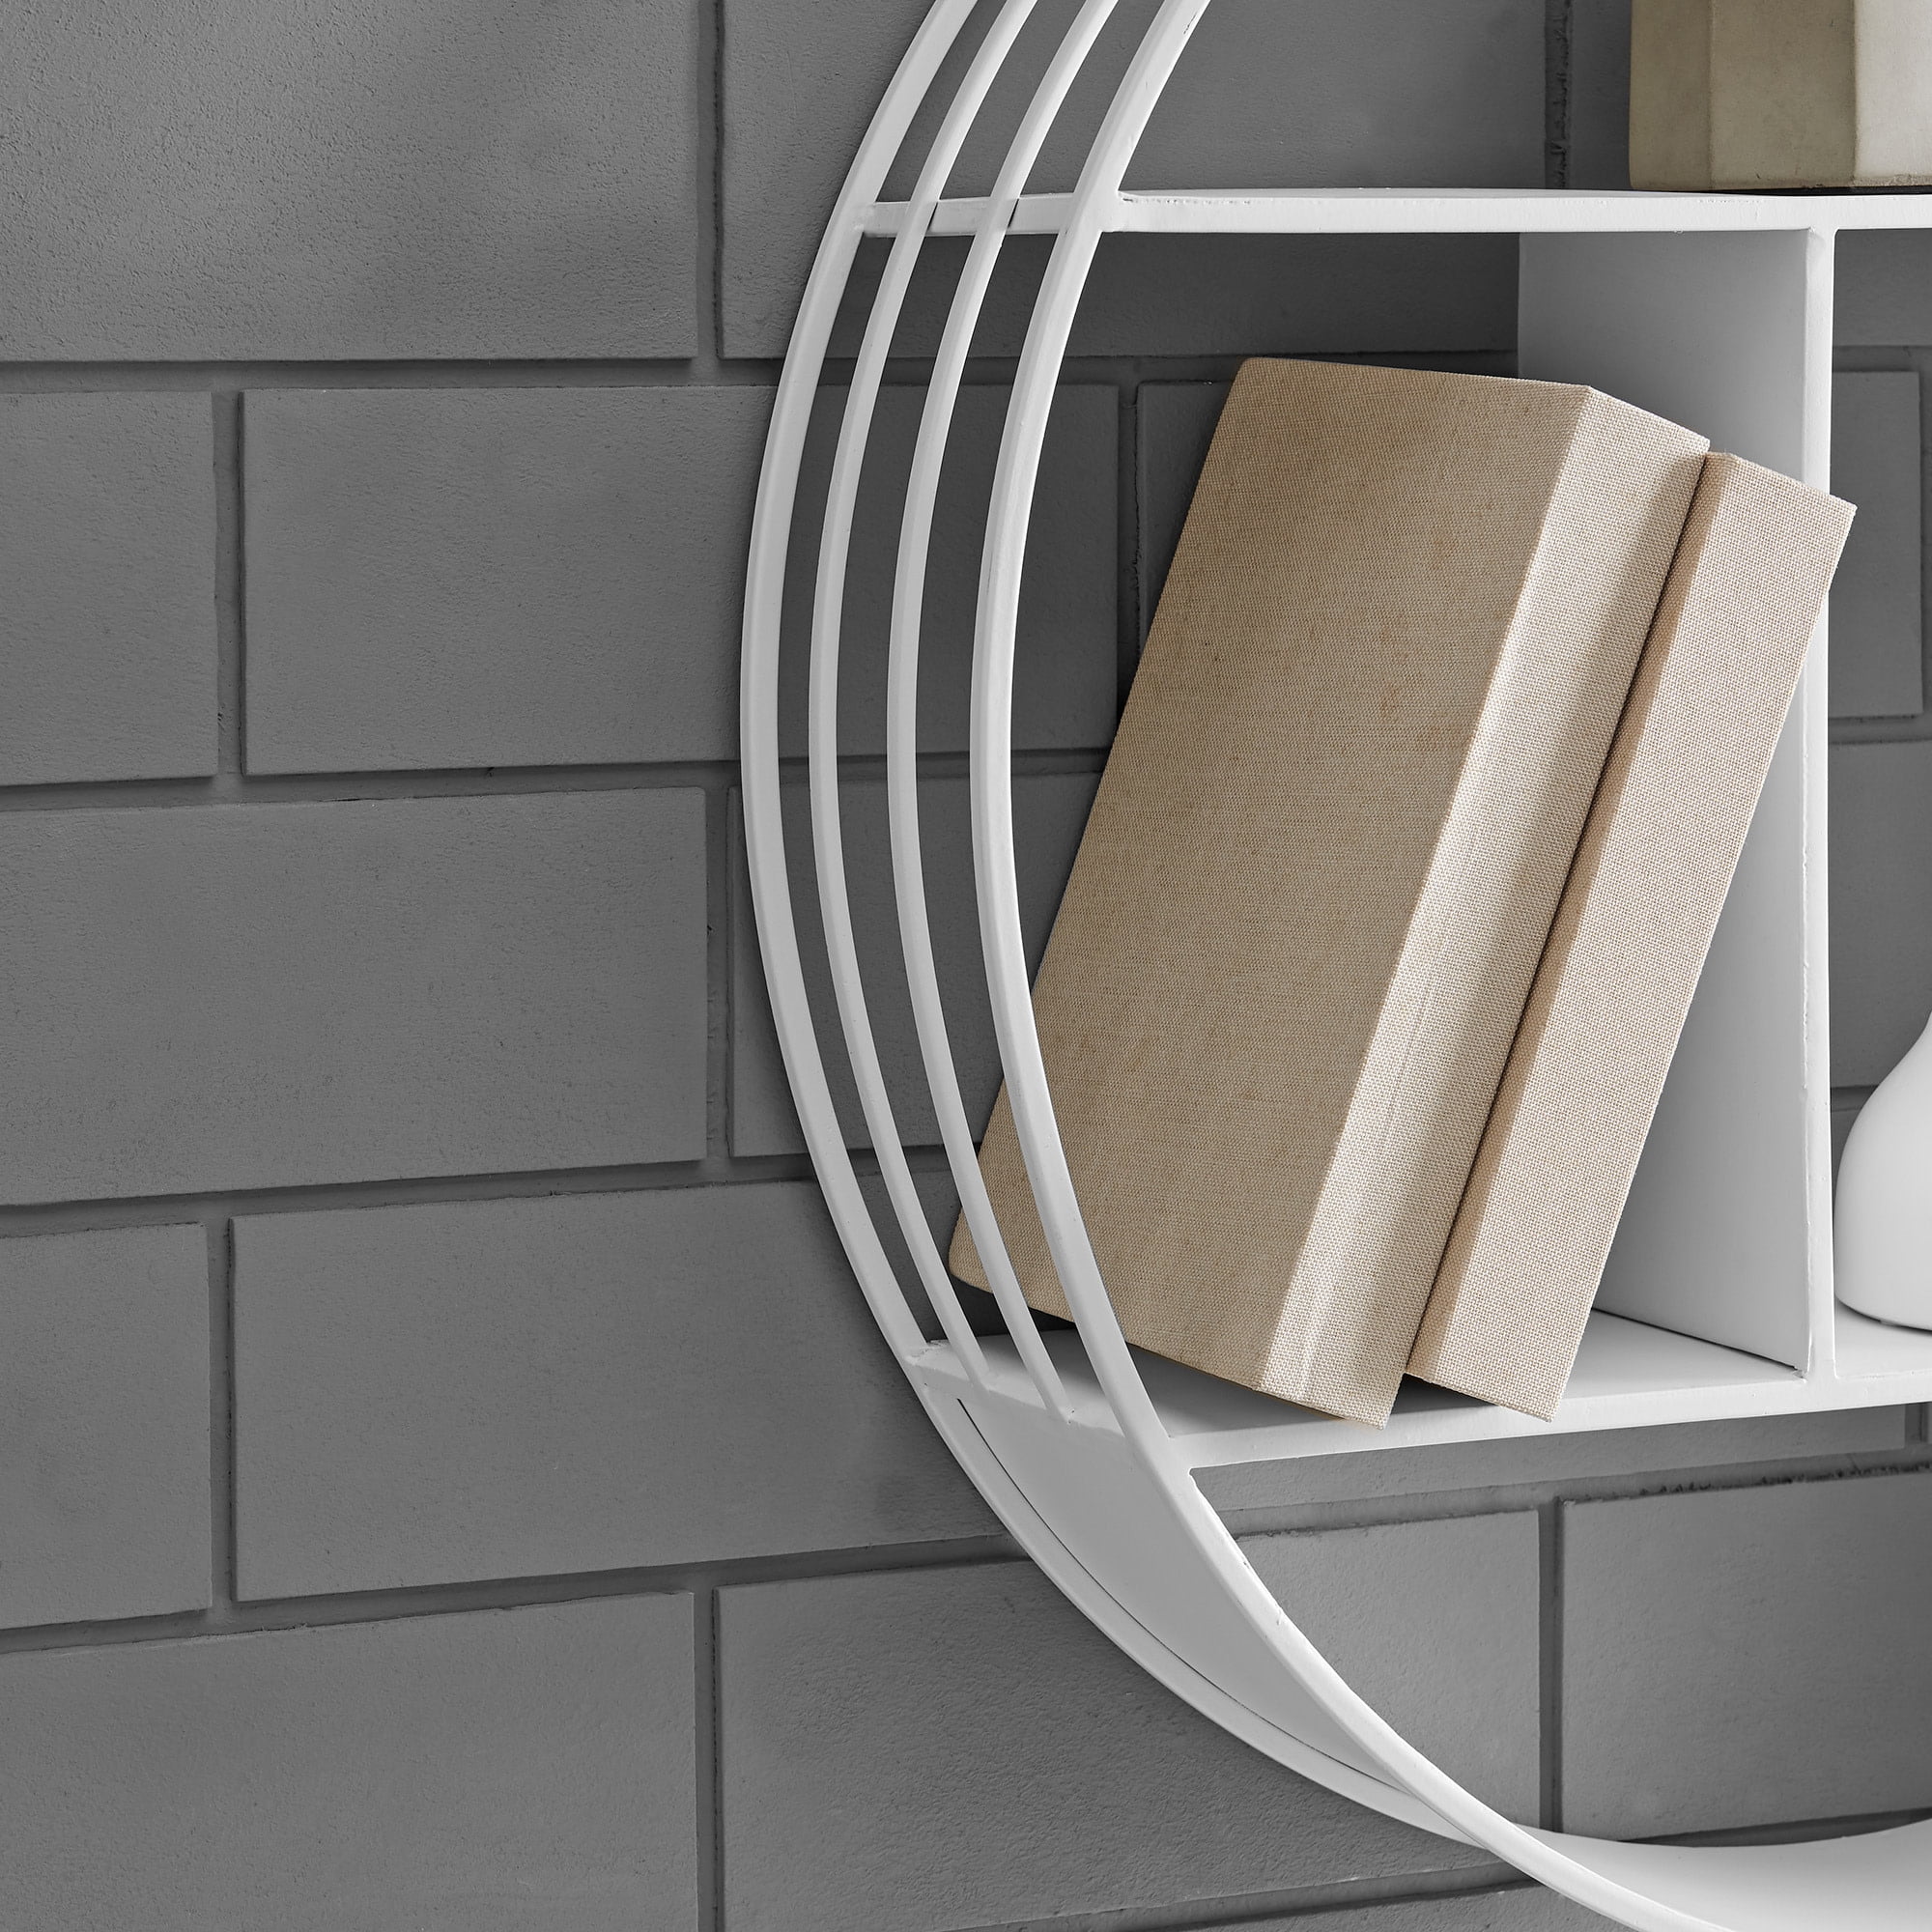 Find Your Perfect FirsTime & Co. White Brody Wall Shelf